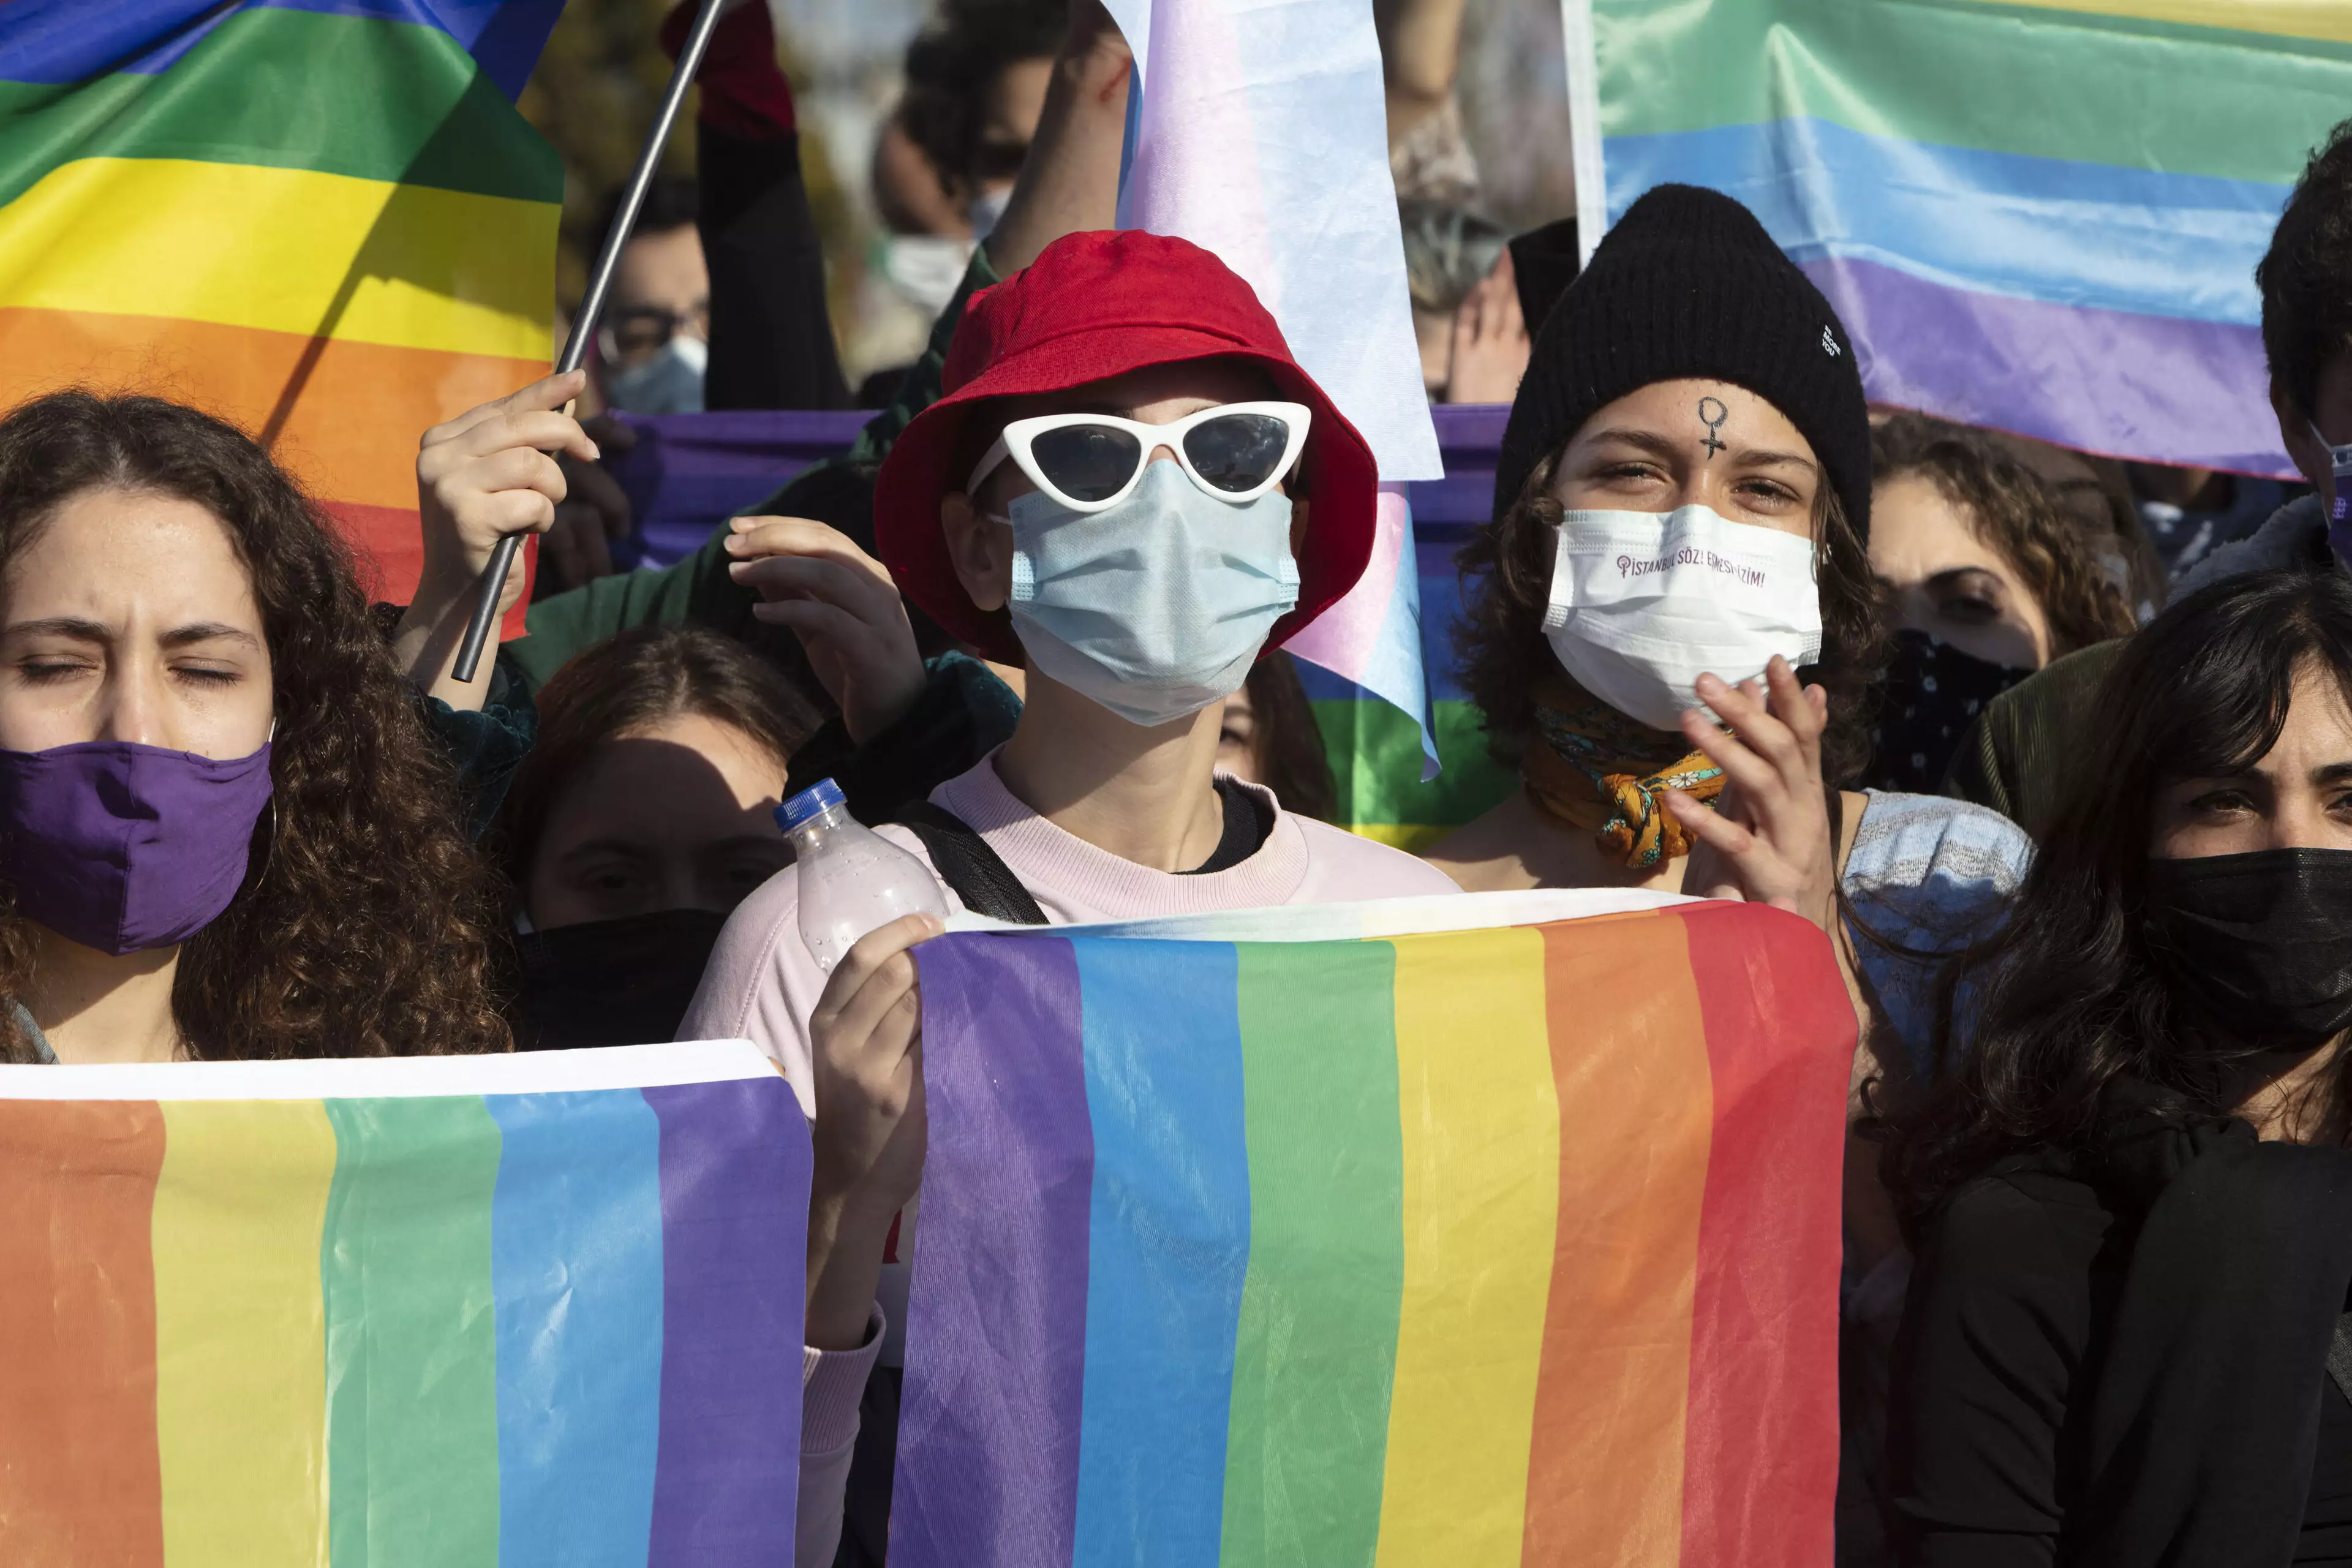 The proposed ban has been welcomed and celebrated across the country (